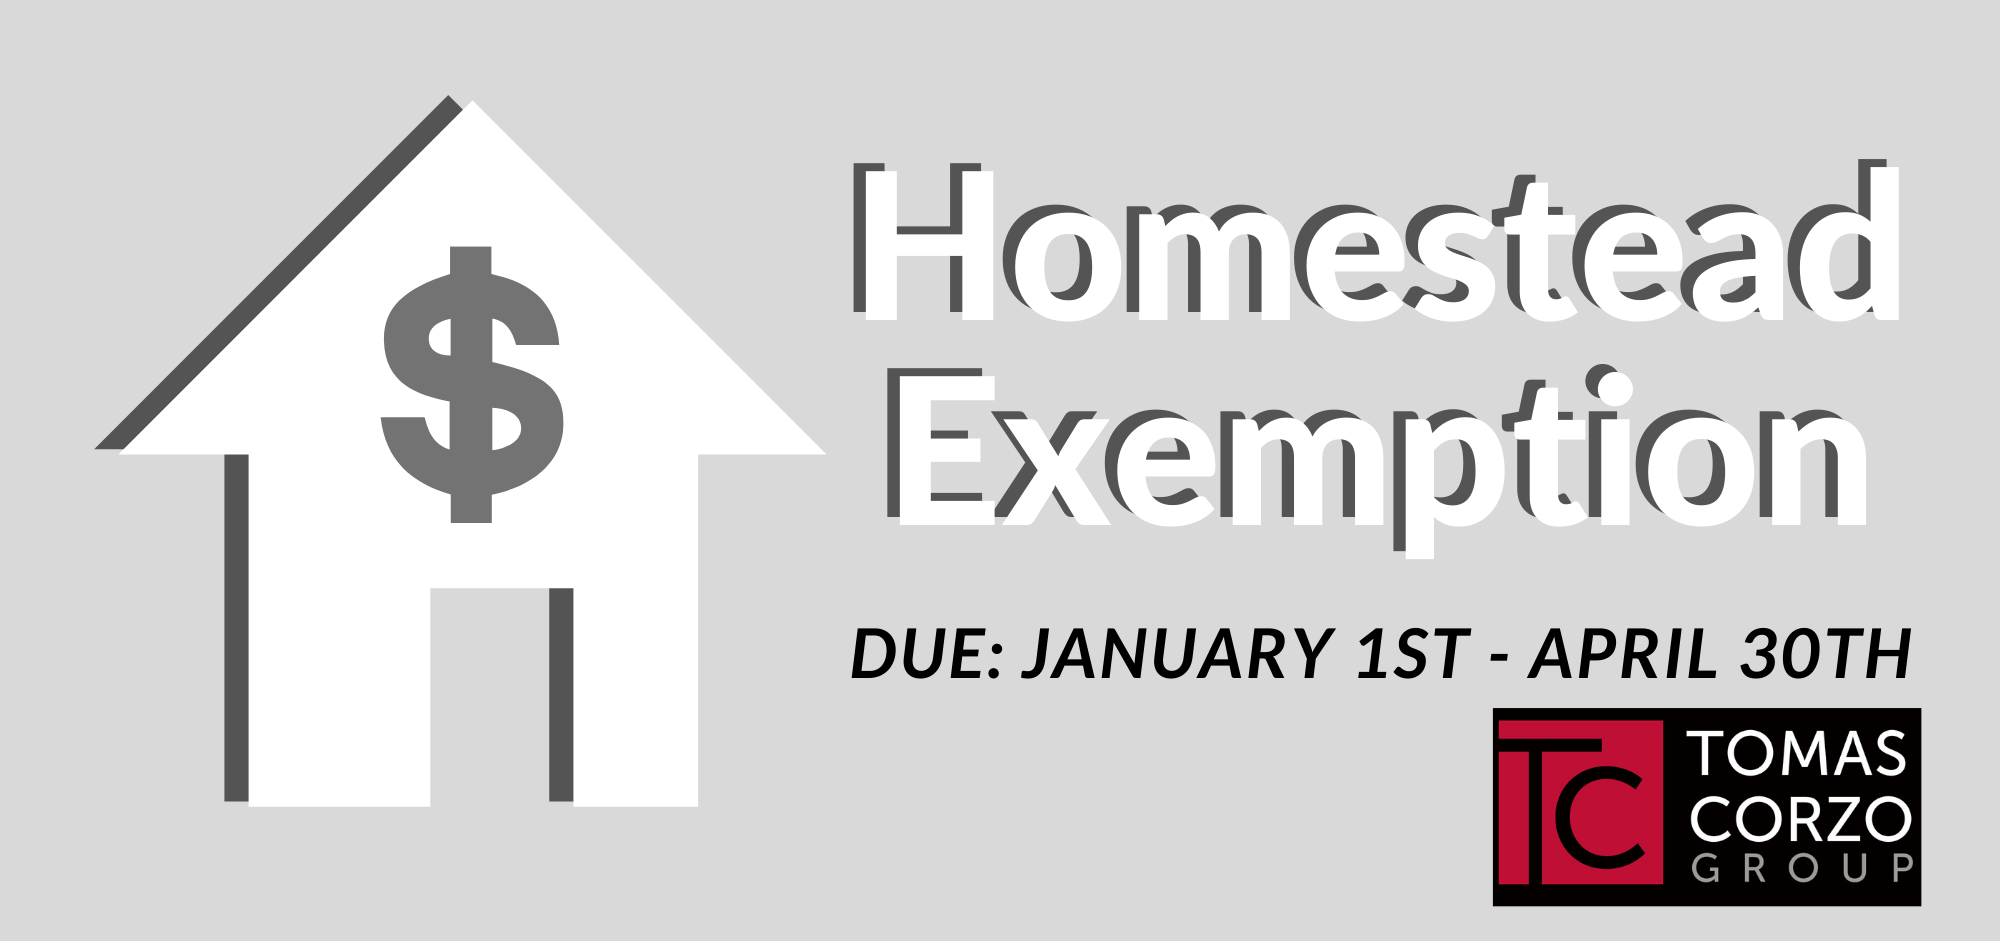 Don't Forget! File for Homestead Exemption